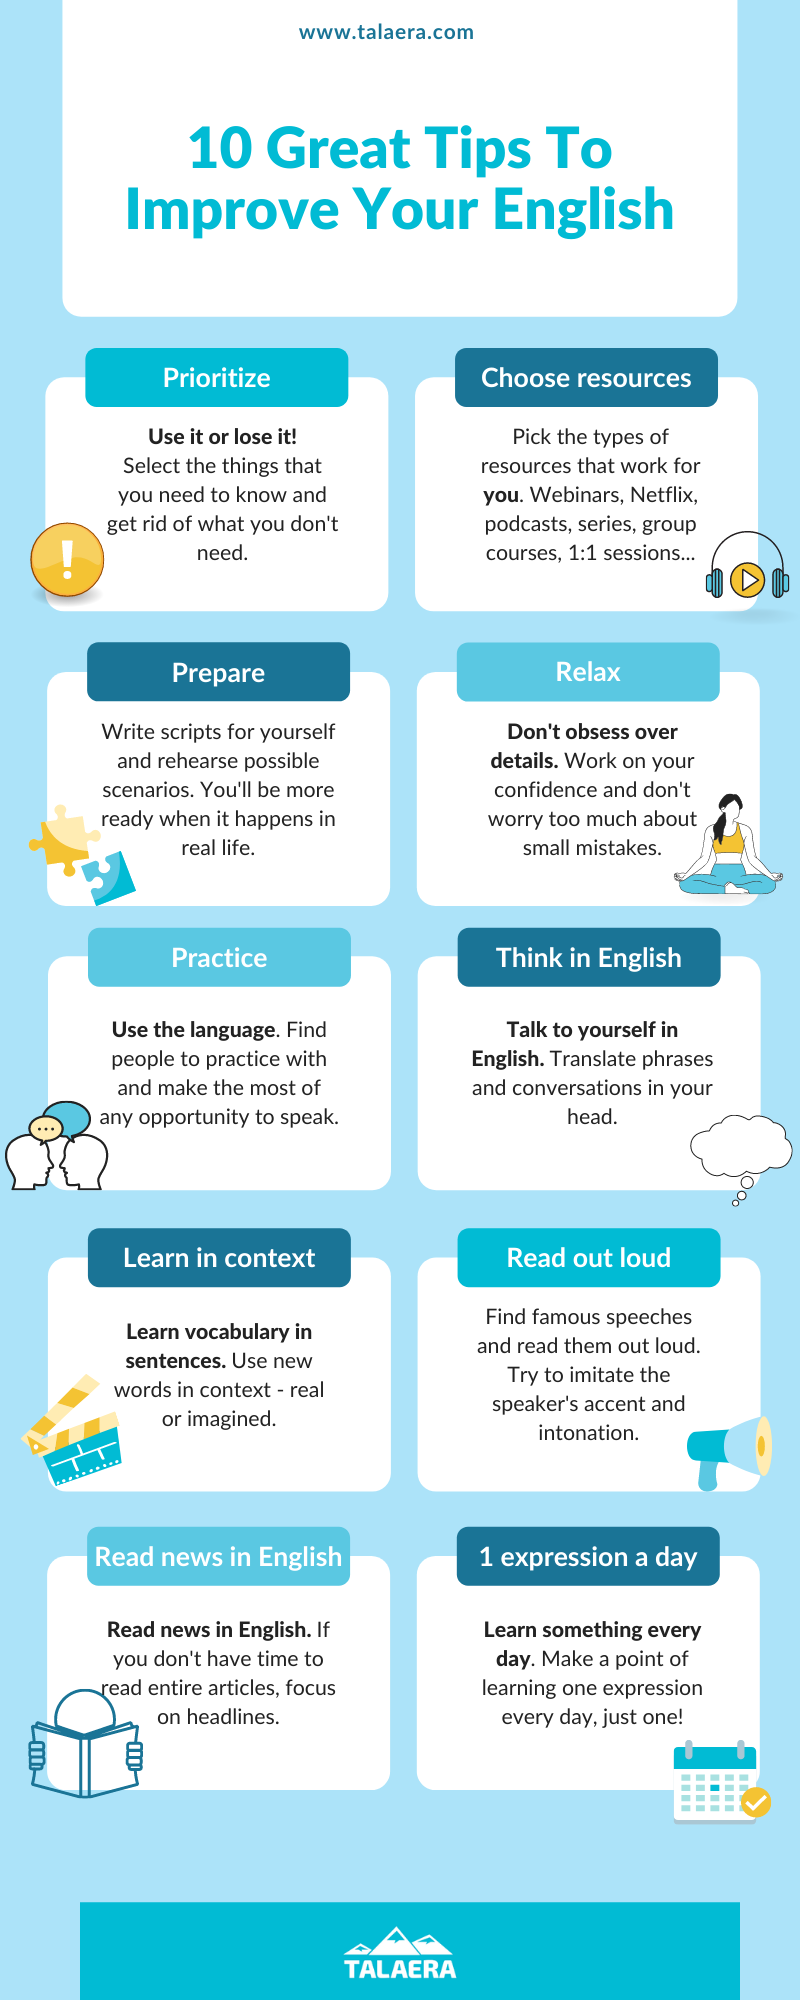 https://4586384.fs1.hubspotusercontent-na1.net/hubfs/4586384/Tips%20to%20Learn%20English%20-%20Talaera%20Infographic.png